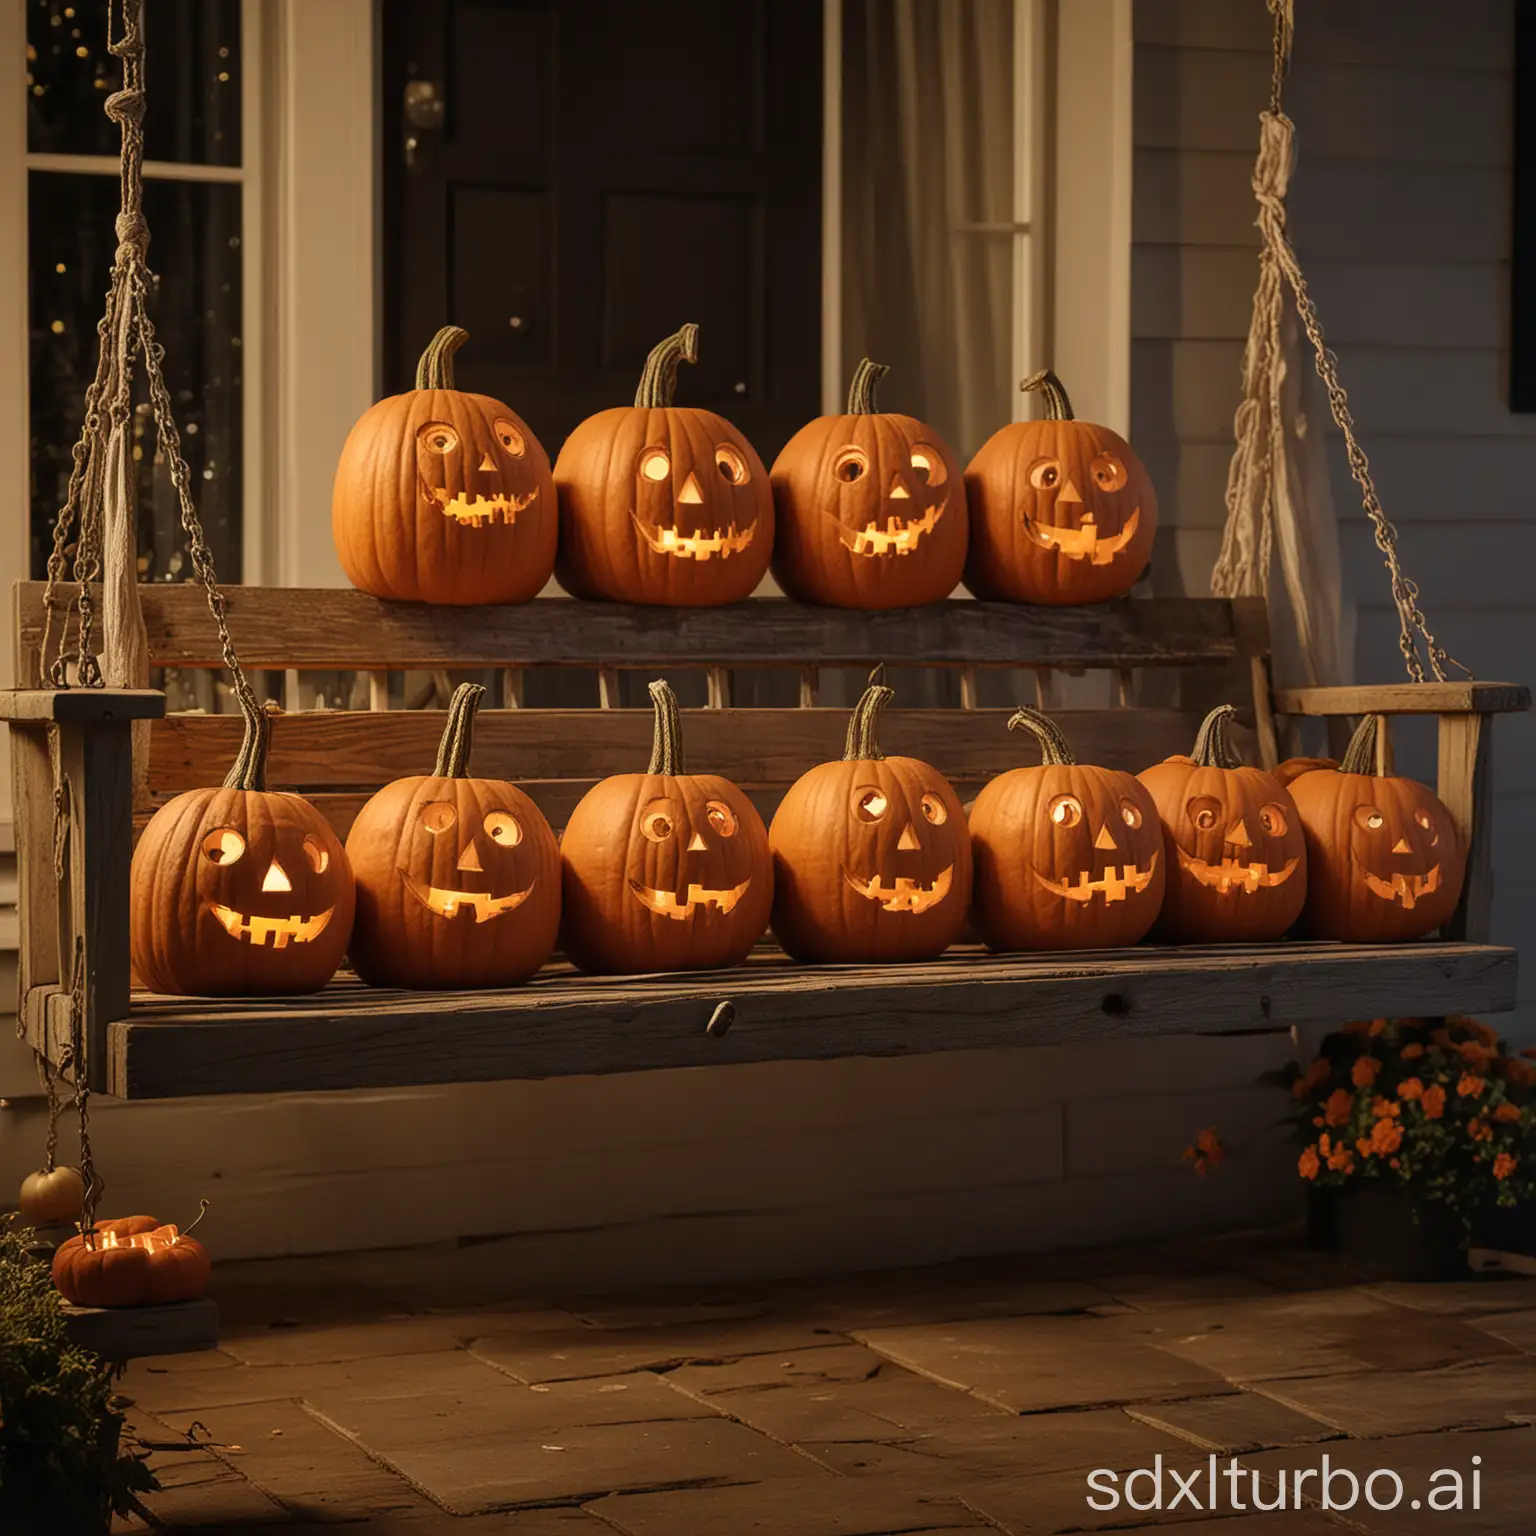 A group of pumpkins with varying sizes and faces, enjoying a cozy night on a porch swing